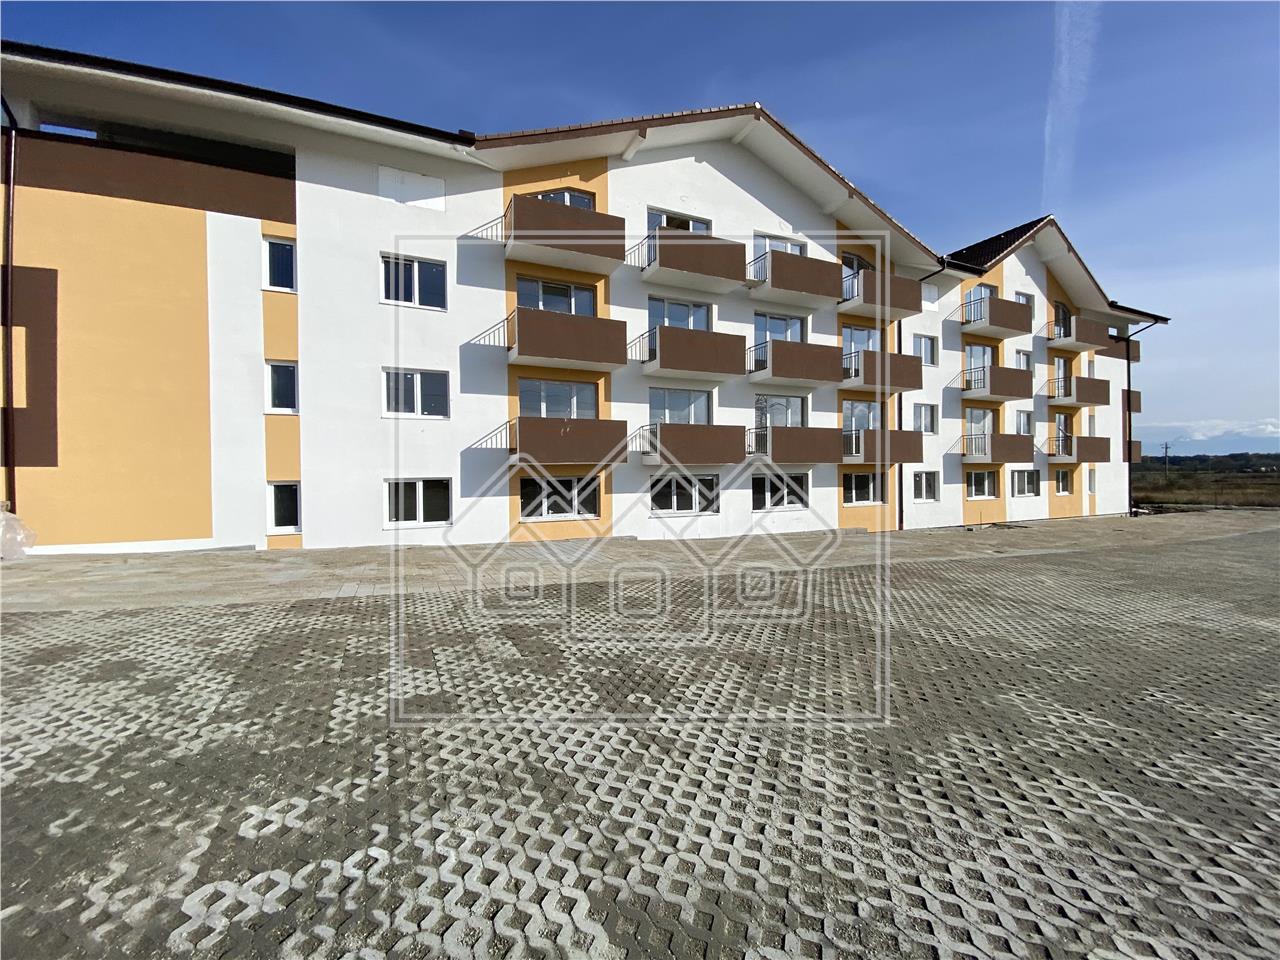 2 room apartment for sale in Sibiu - new and listed building